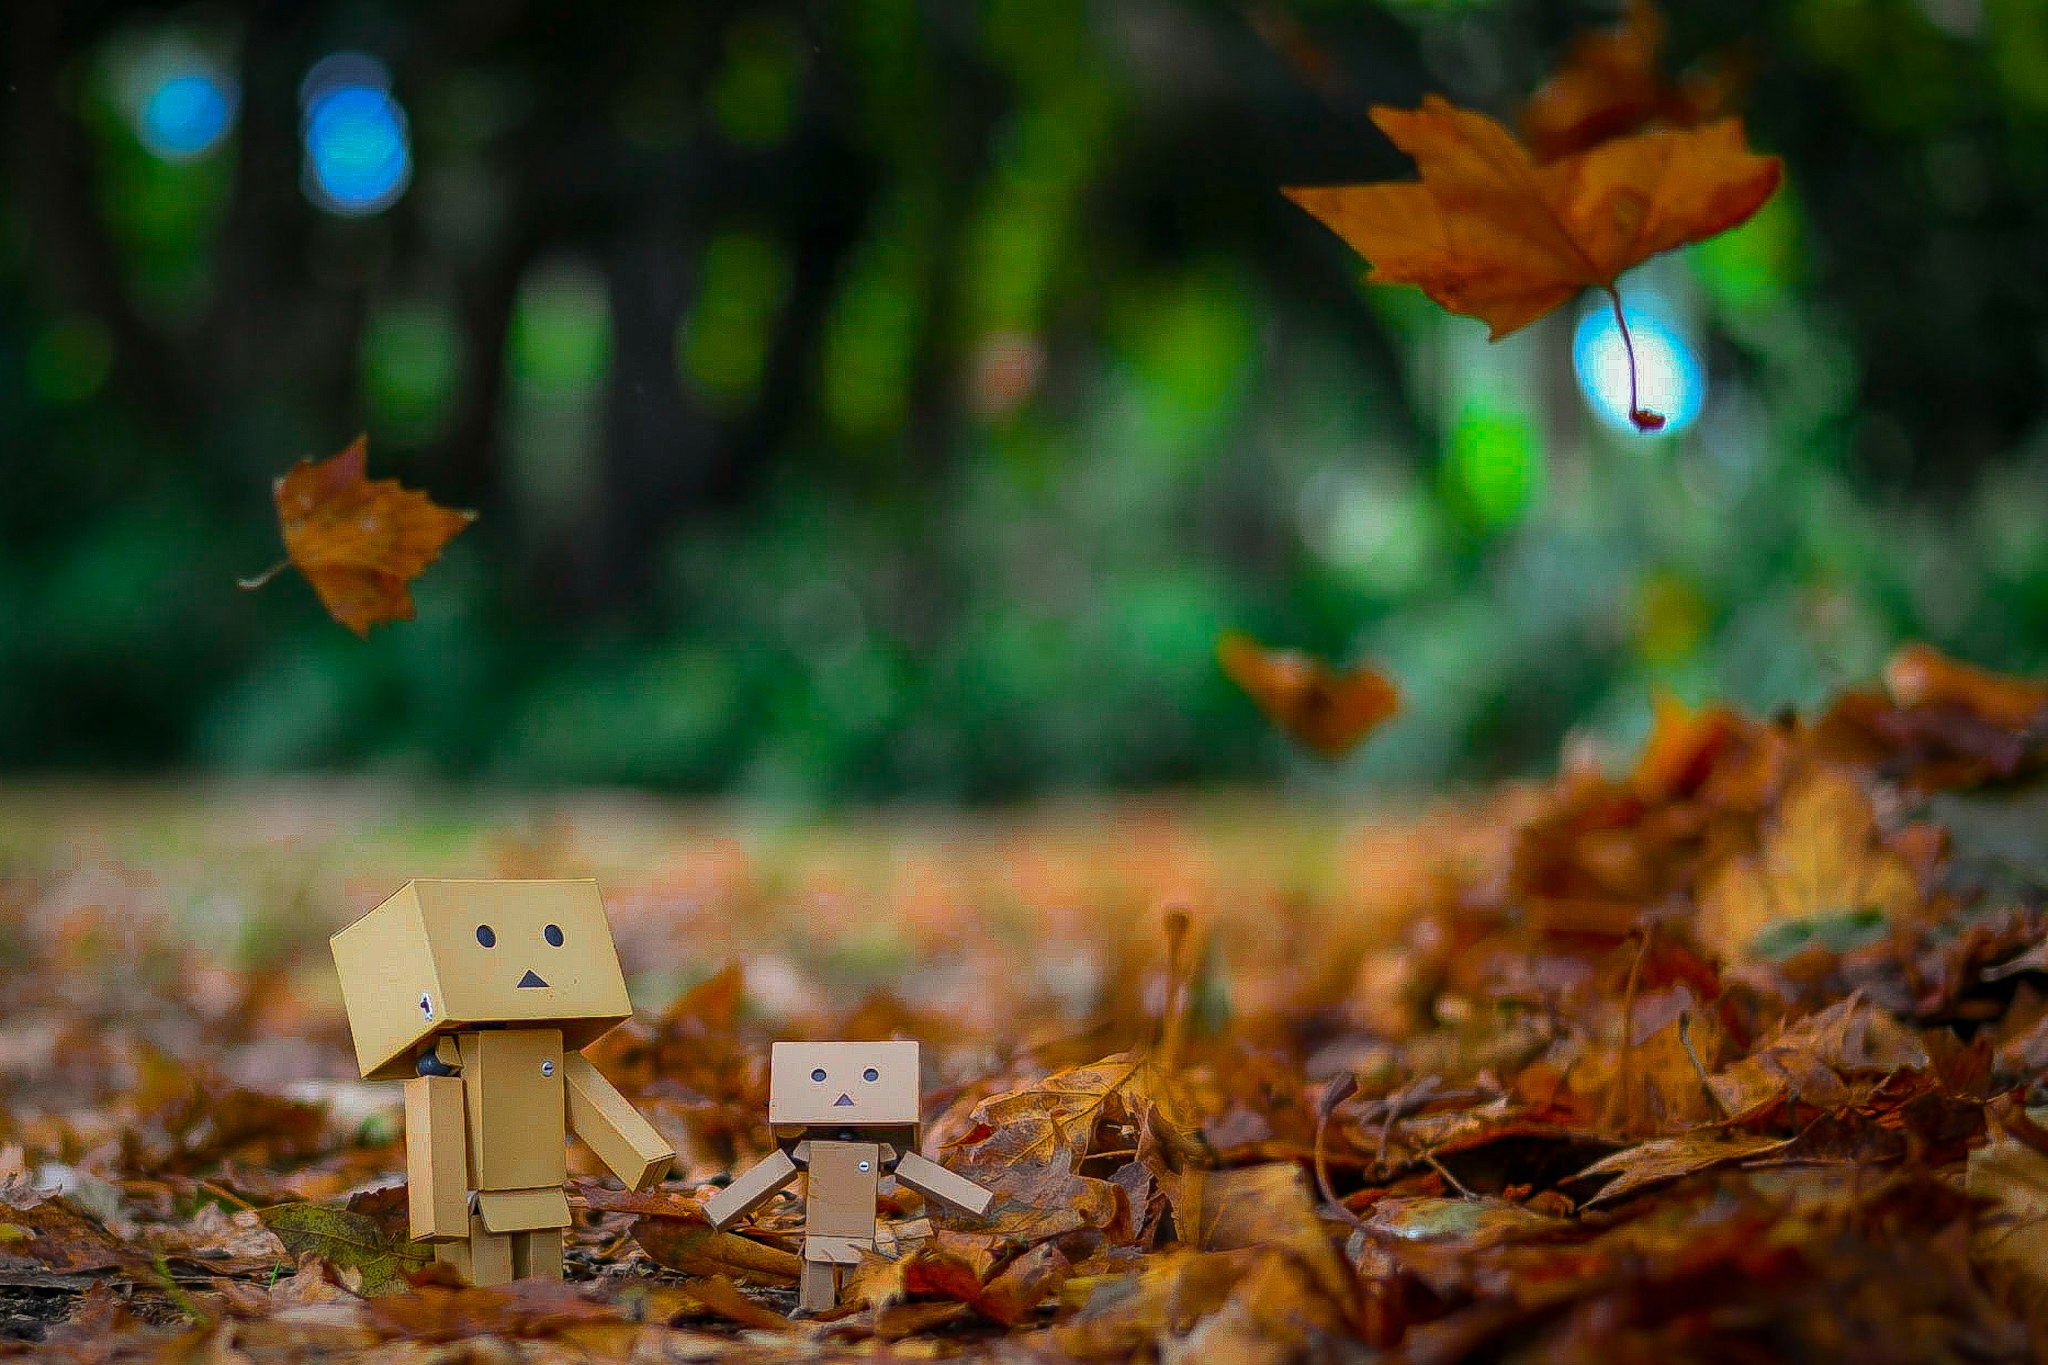 Two toy robots stand in a field surrounded by brown, autumnal leaves. The robots, made from a series of cubes, look towards the sky as leaves fall around them.